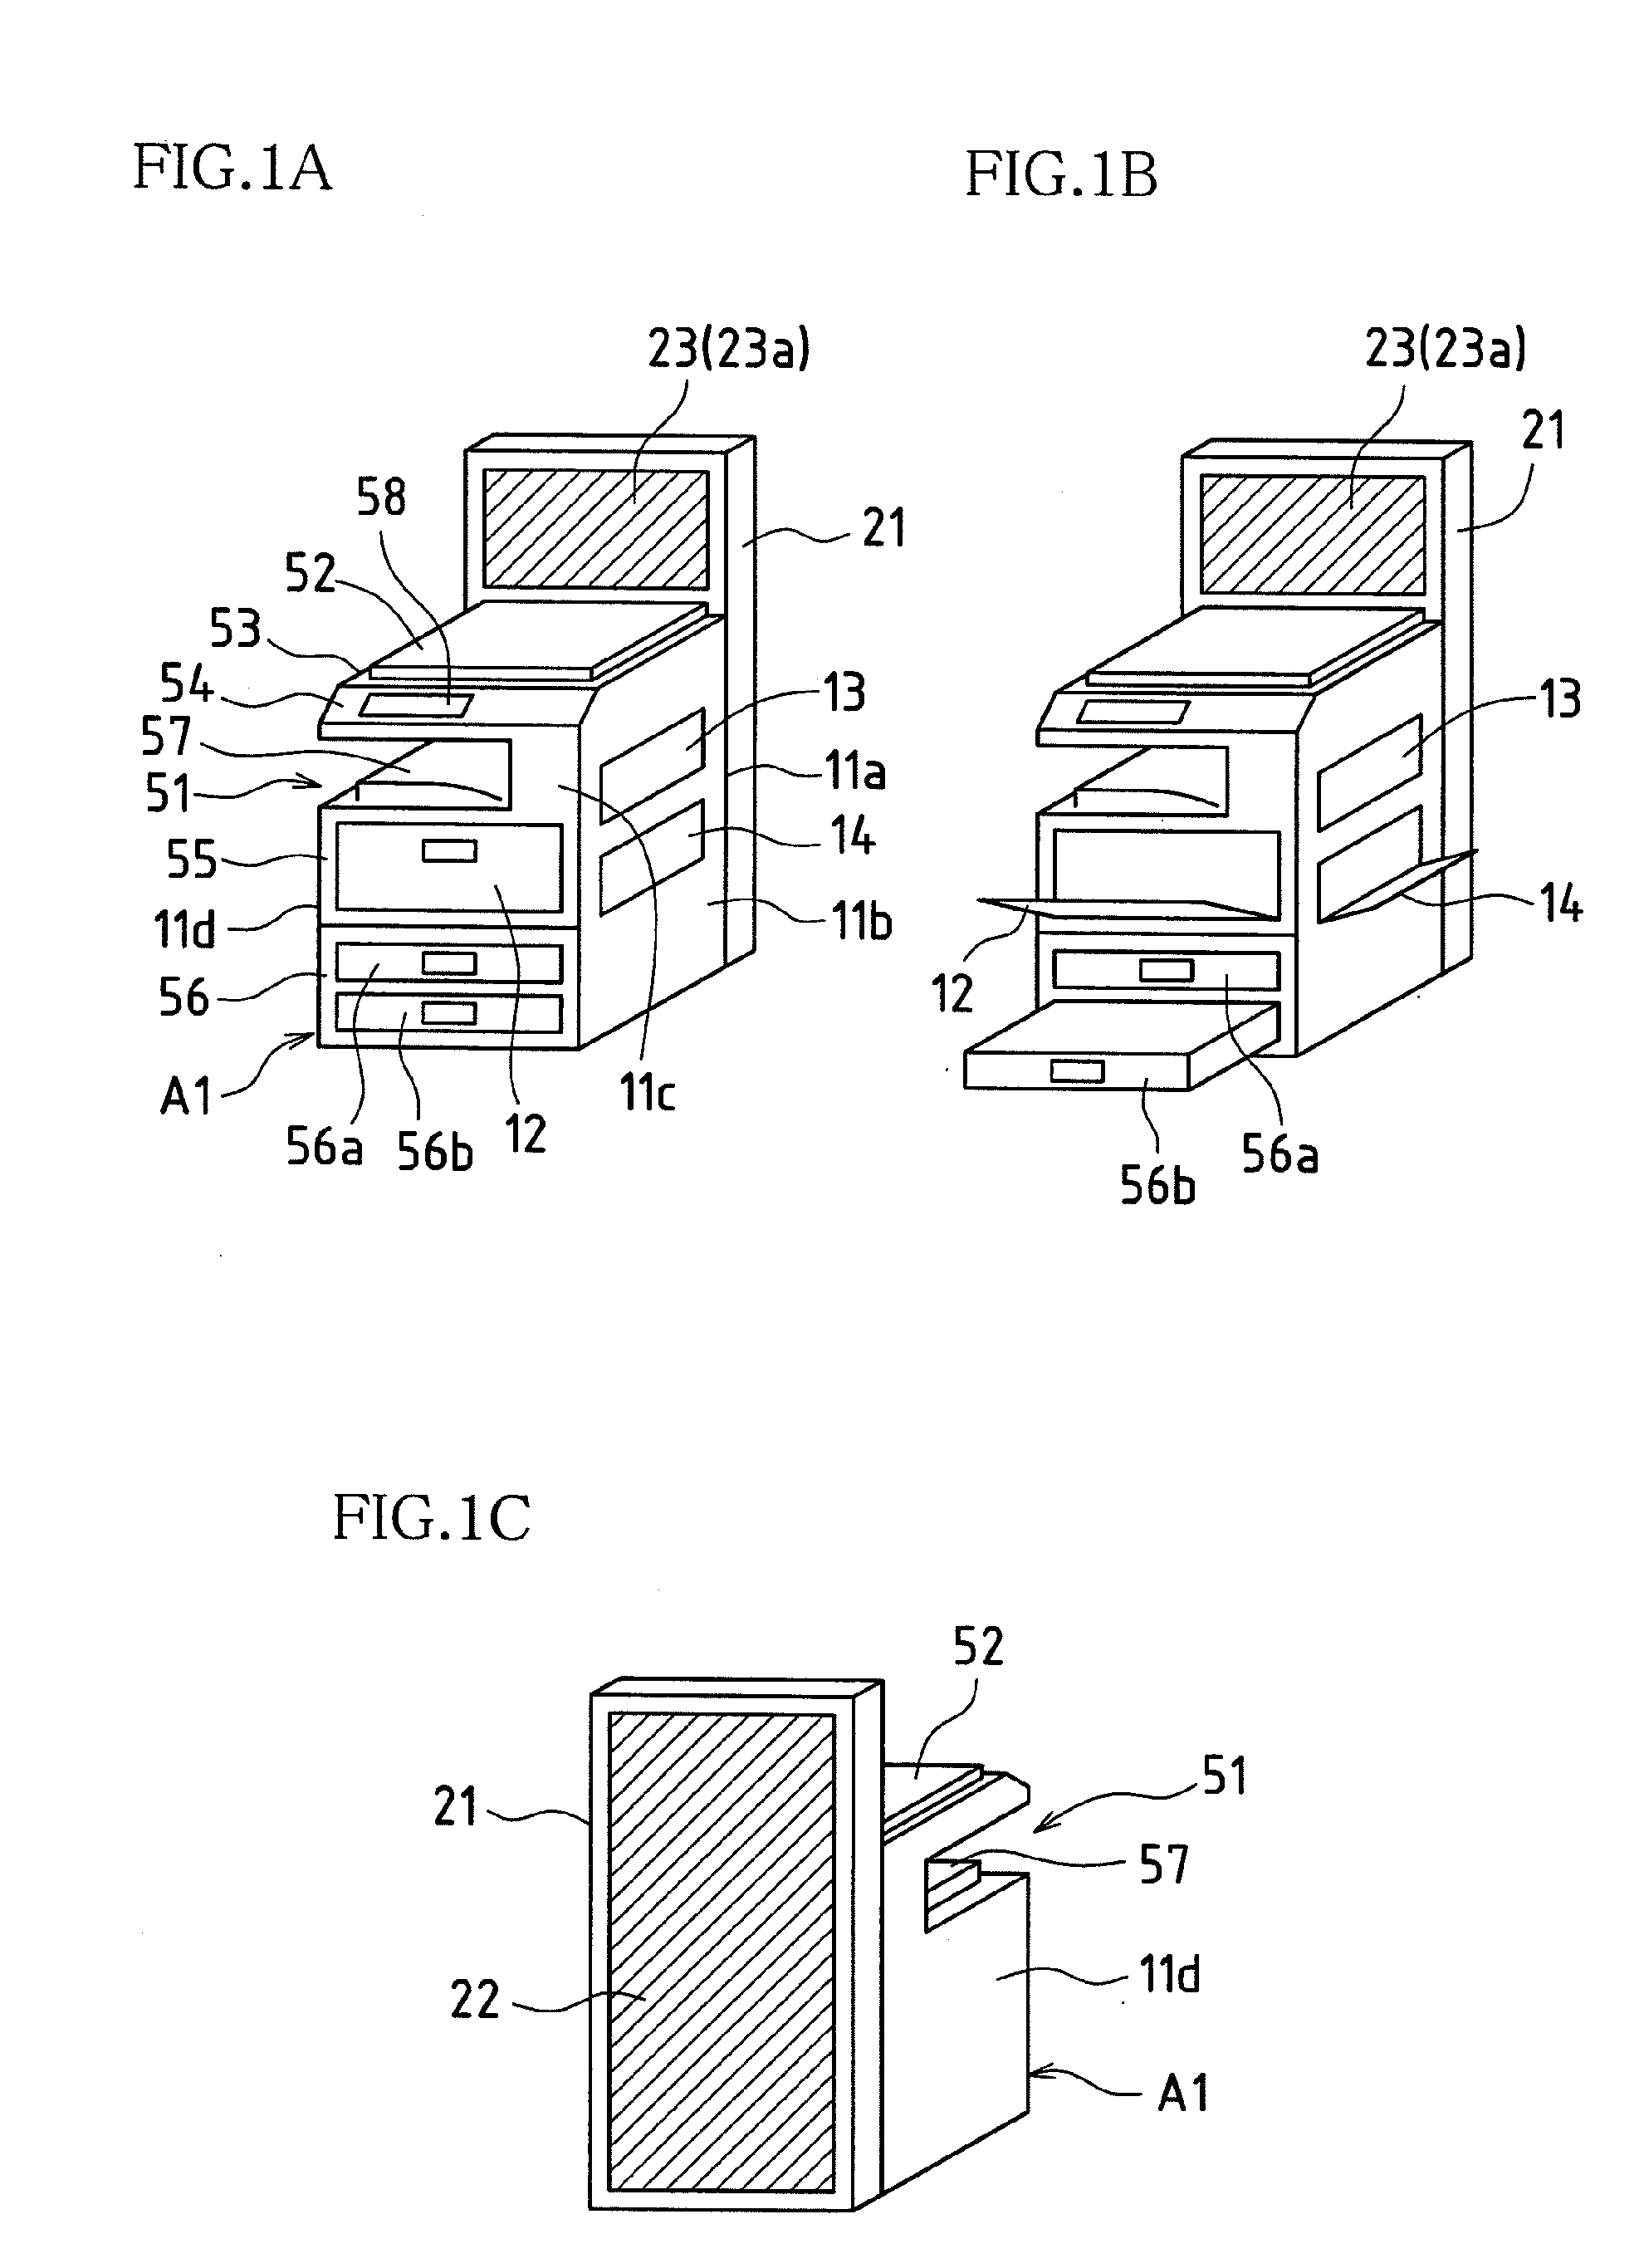 Display-integrated image forming apparatus